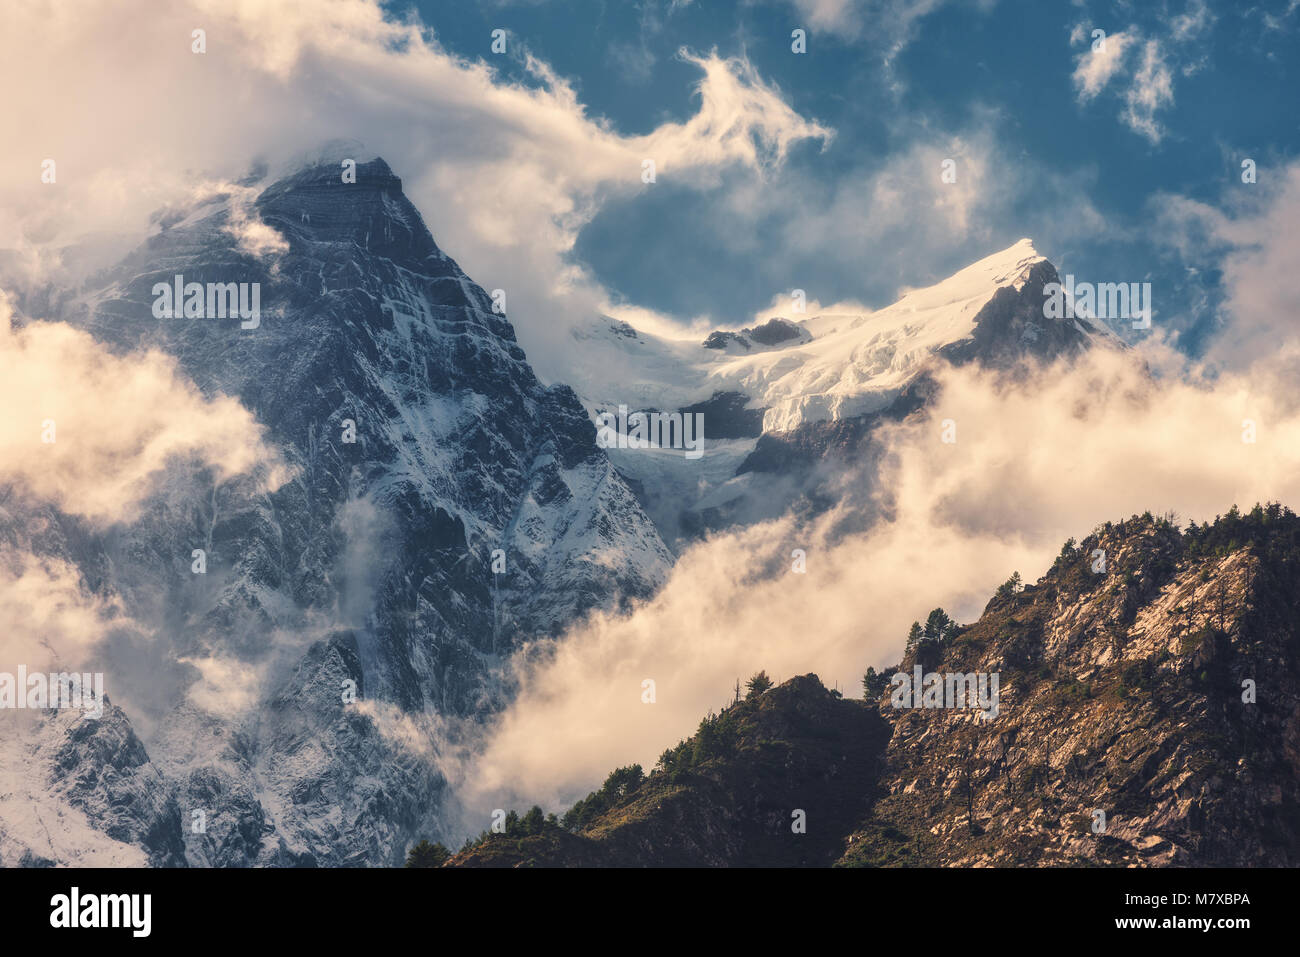 High mountains with snowy peaks in clouds at bright sunny evening in Nepal. Colorful landscape with beautiful rocks and dramatic cloudy sky at sunset. Stock Photo